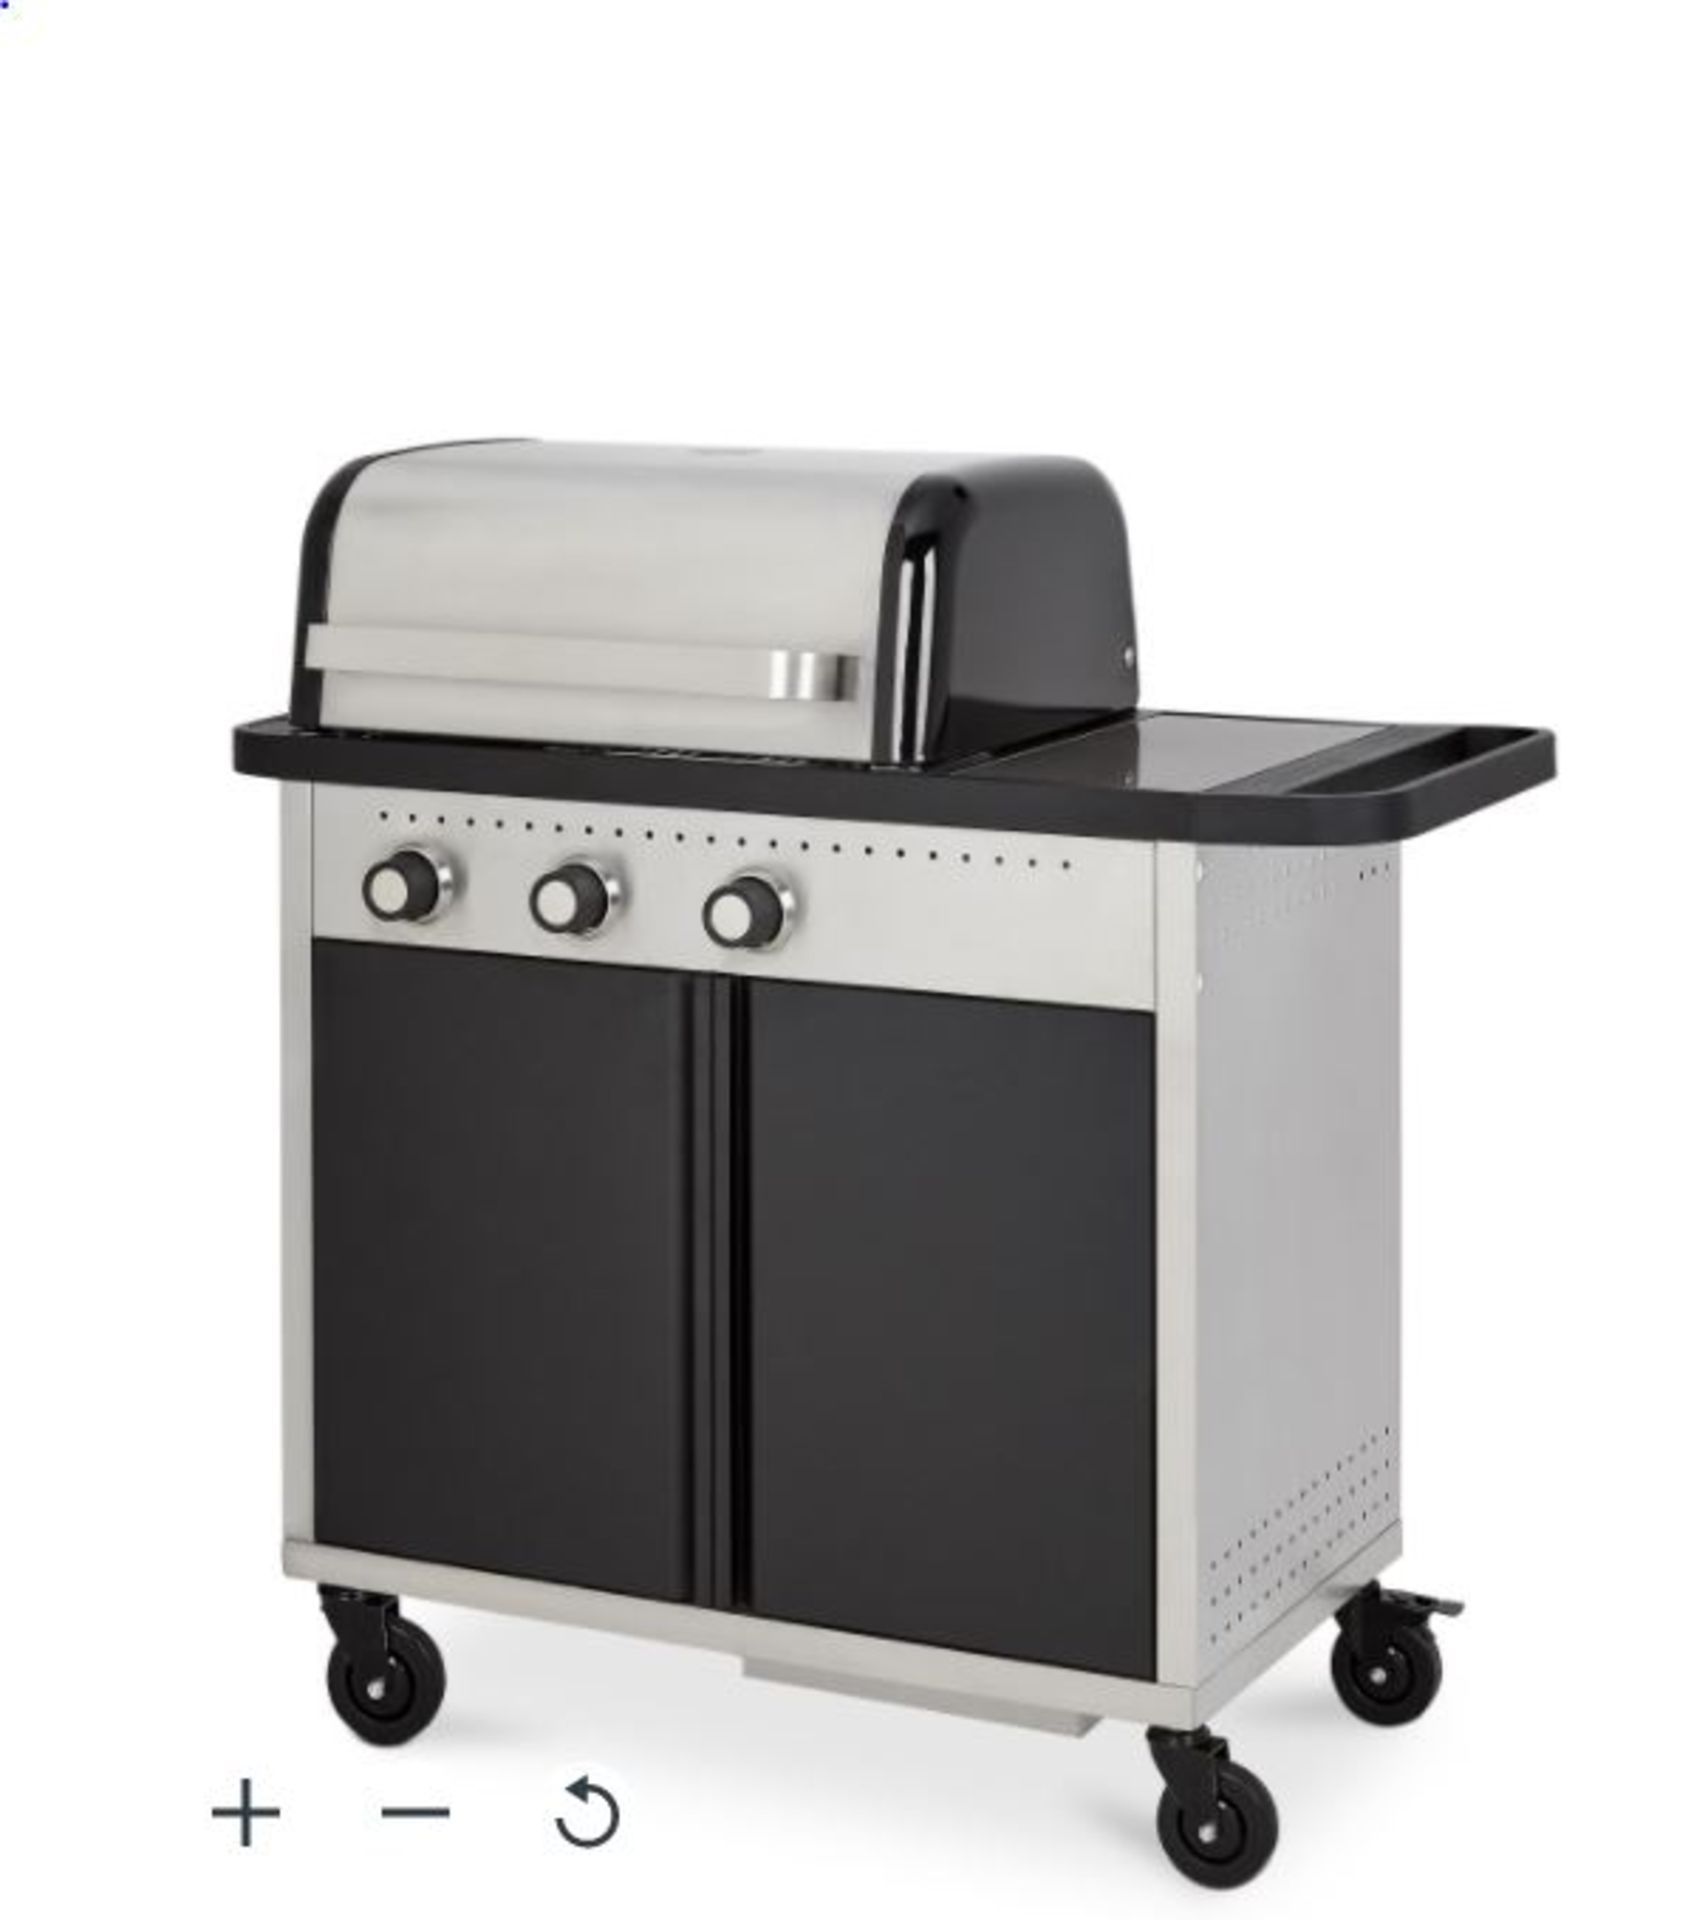 NEW BOXED - Rockwell 310 3 burner Gas Black Barbecue. With dishwasher safe grills, integrated